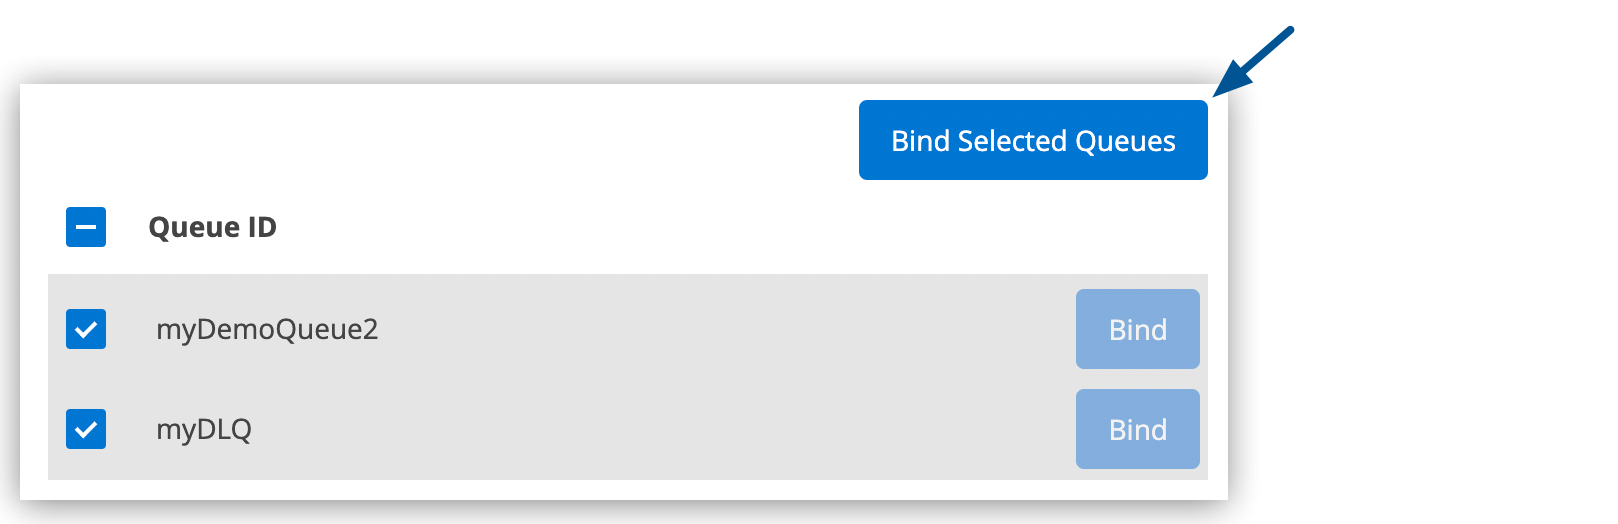 Bind Selected Queues button